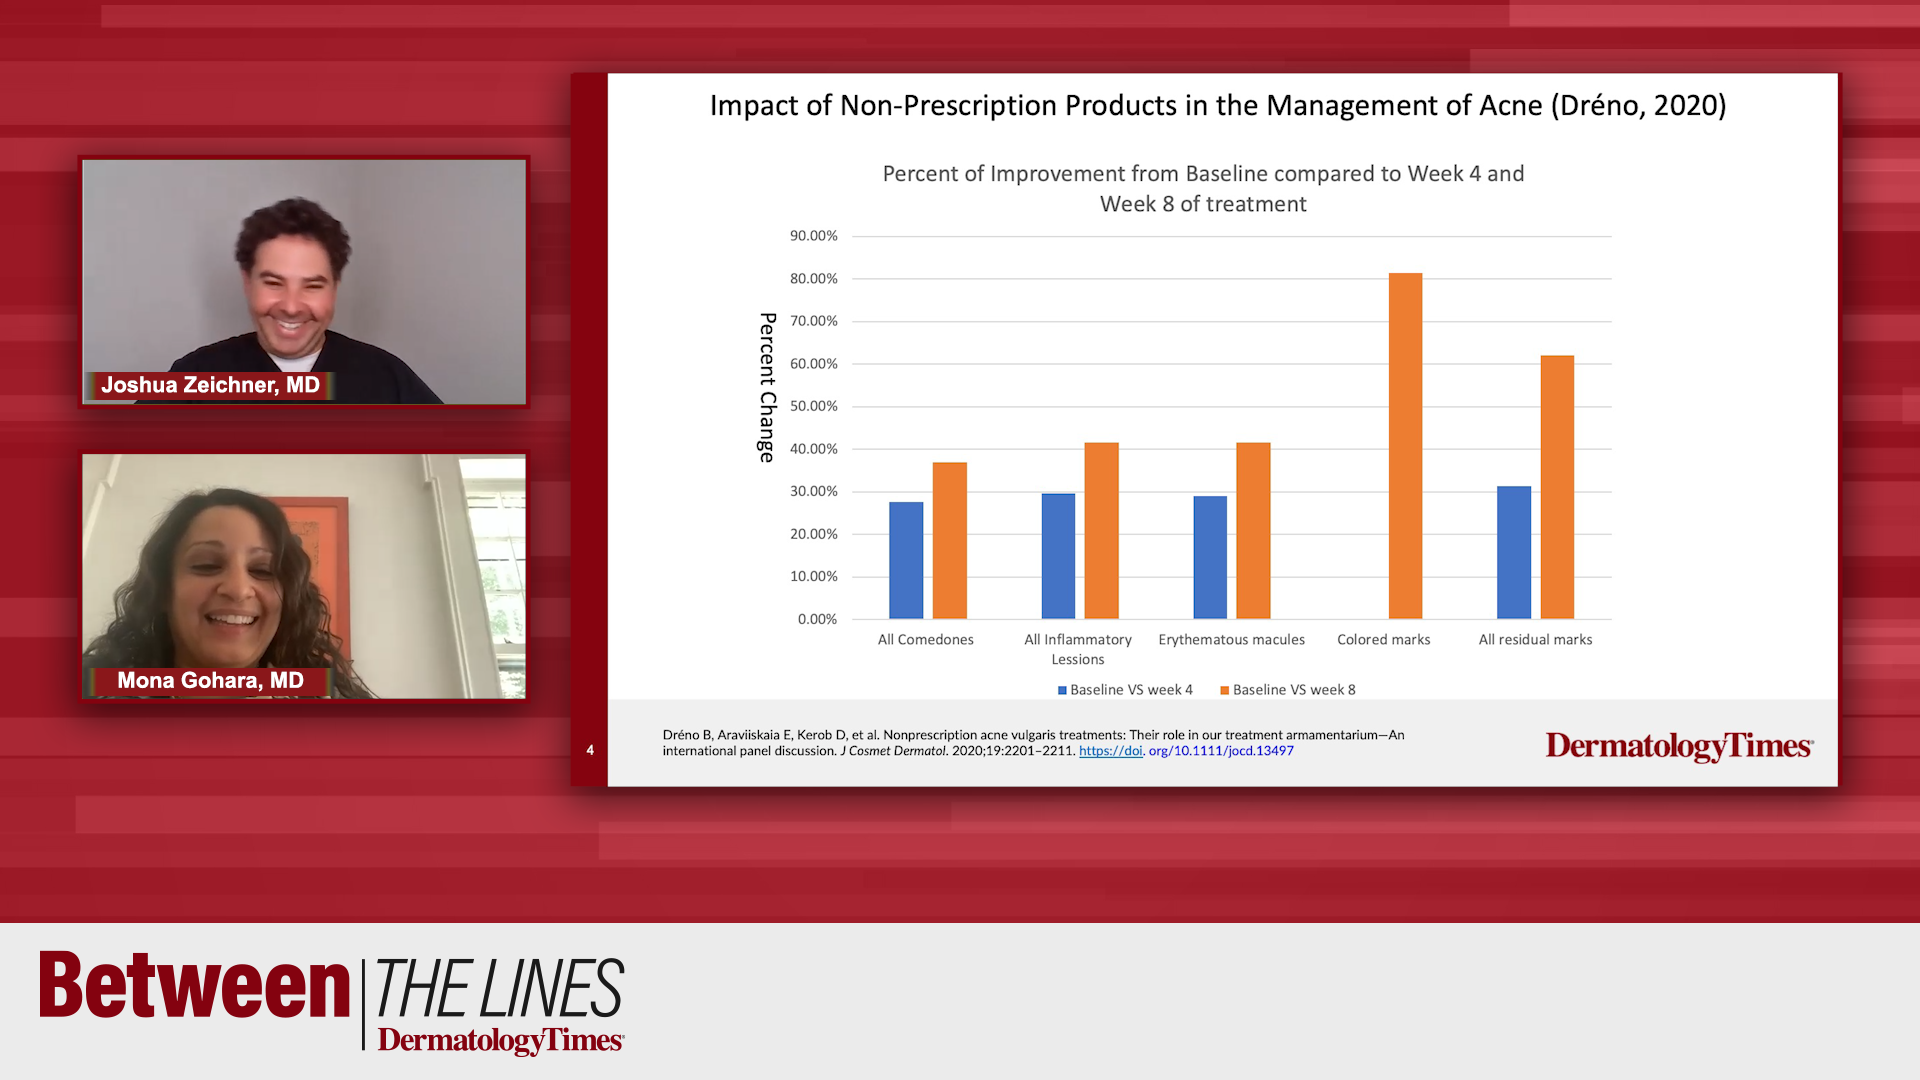 Between the Lines: The Role of Non-Prescription Products in the Management of Acne